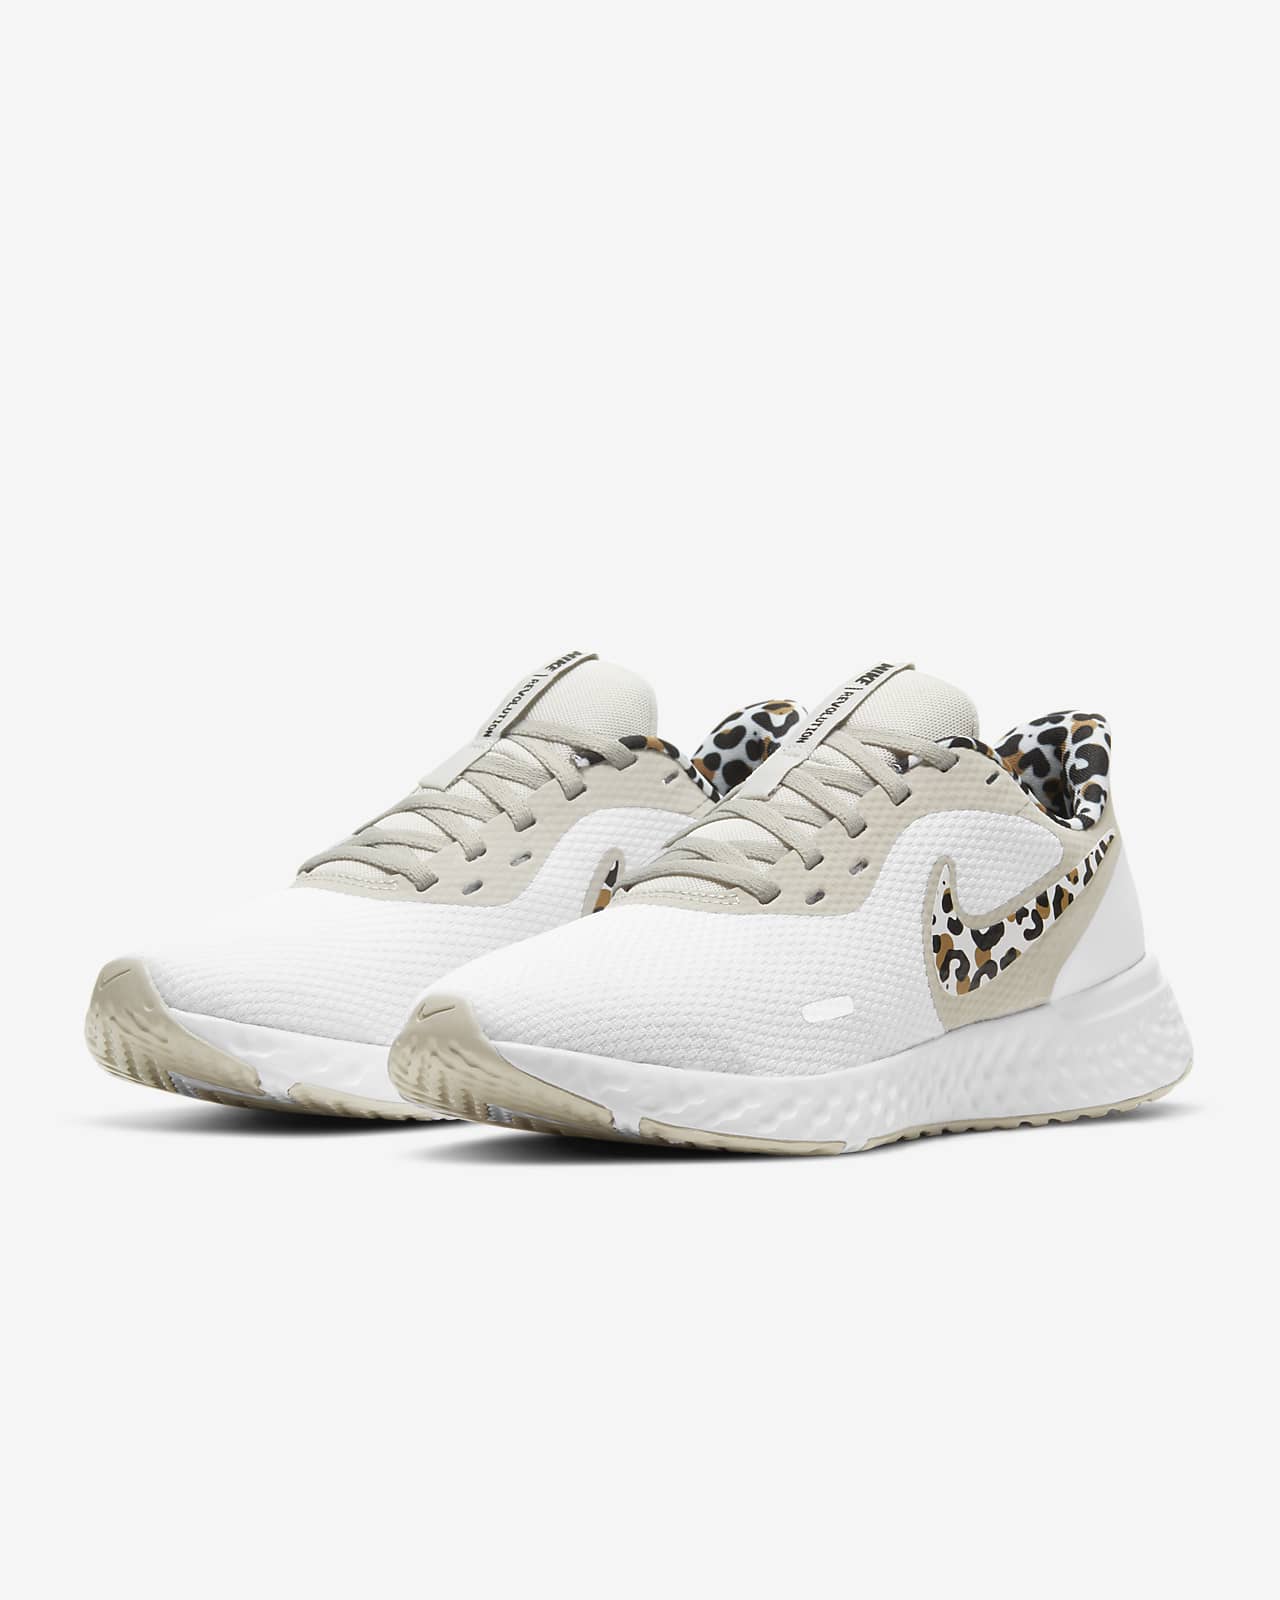 nike leopard running shoes Promotions